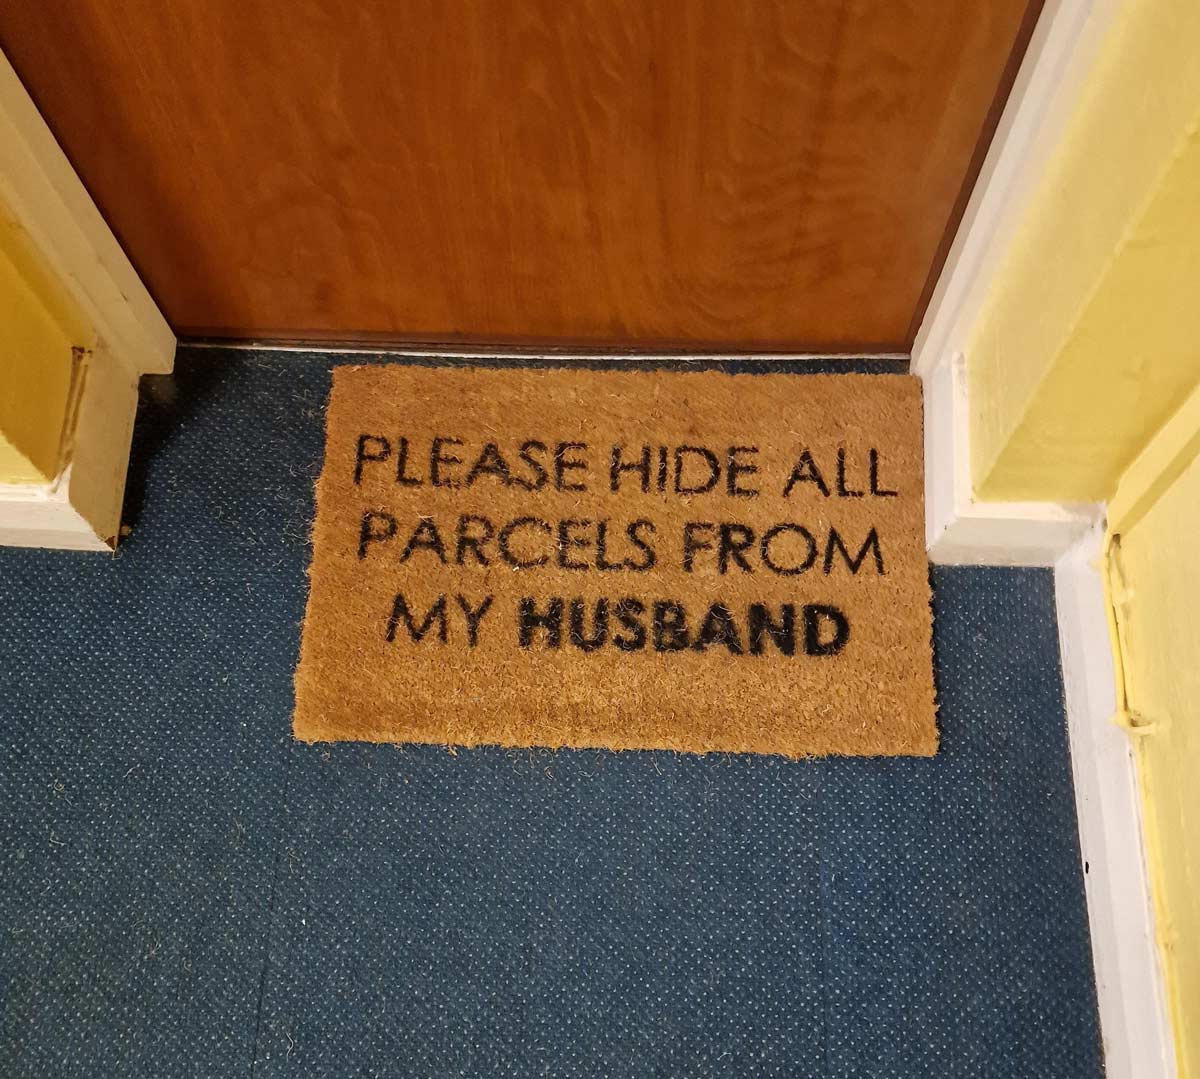 As someone who times the arrival of their parcels carefully, this gave me a chuckle